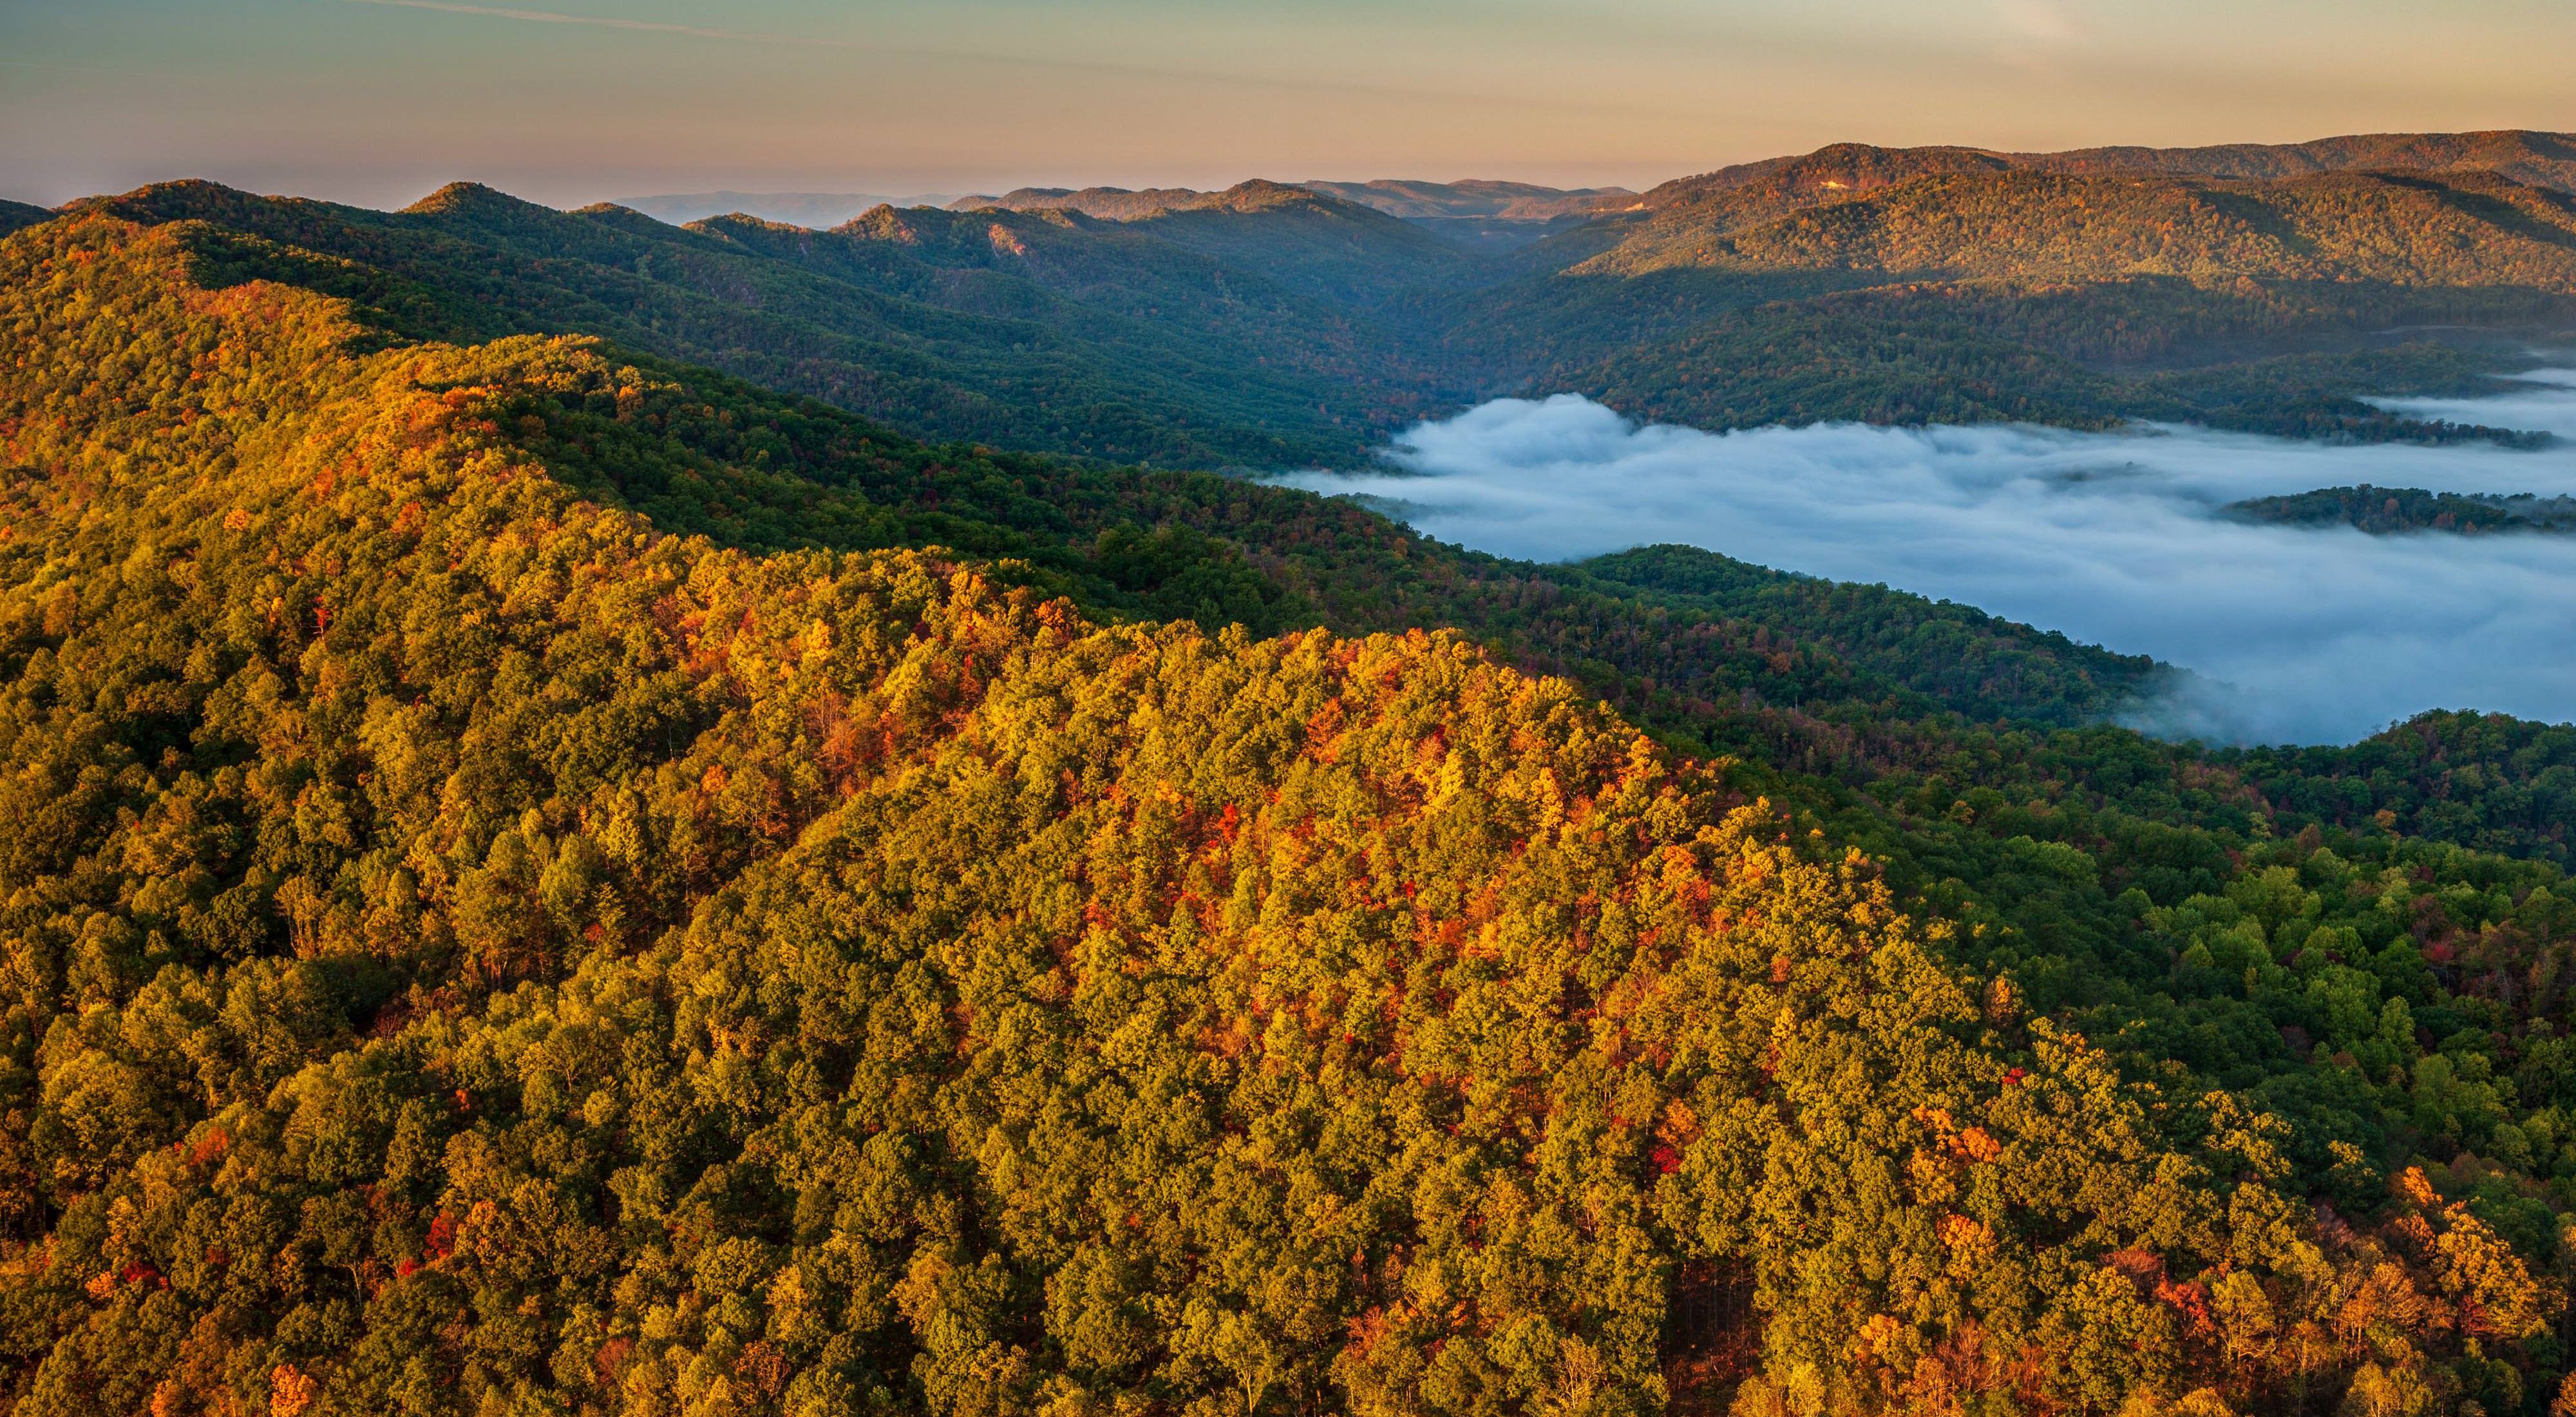 A mist rises up next to a colorful forested ridge.